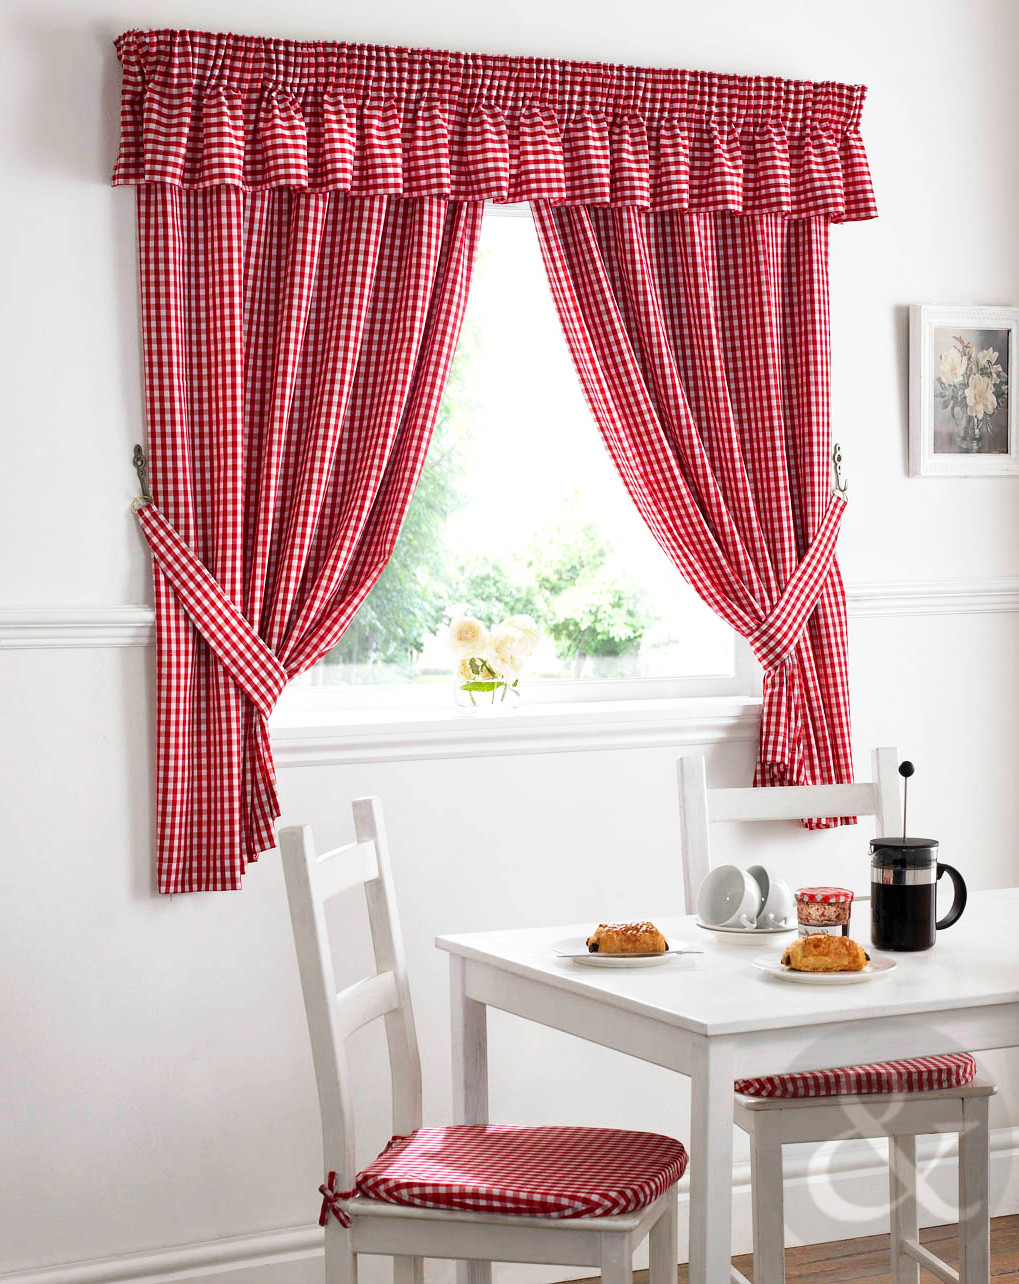 Red Valance Curtains For Kitchen
 Gingham Check Kitchen Curtains Ready Made Pencil Pleat Net